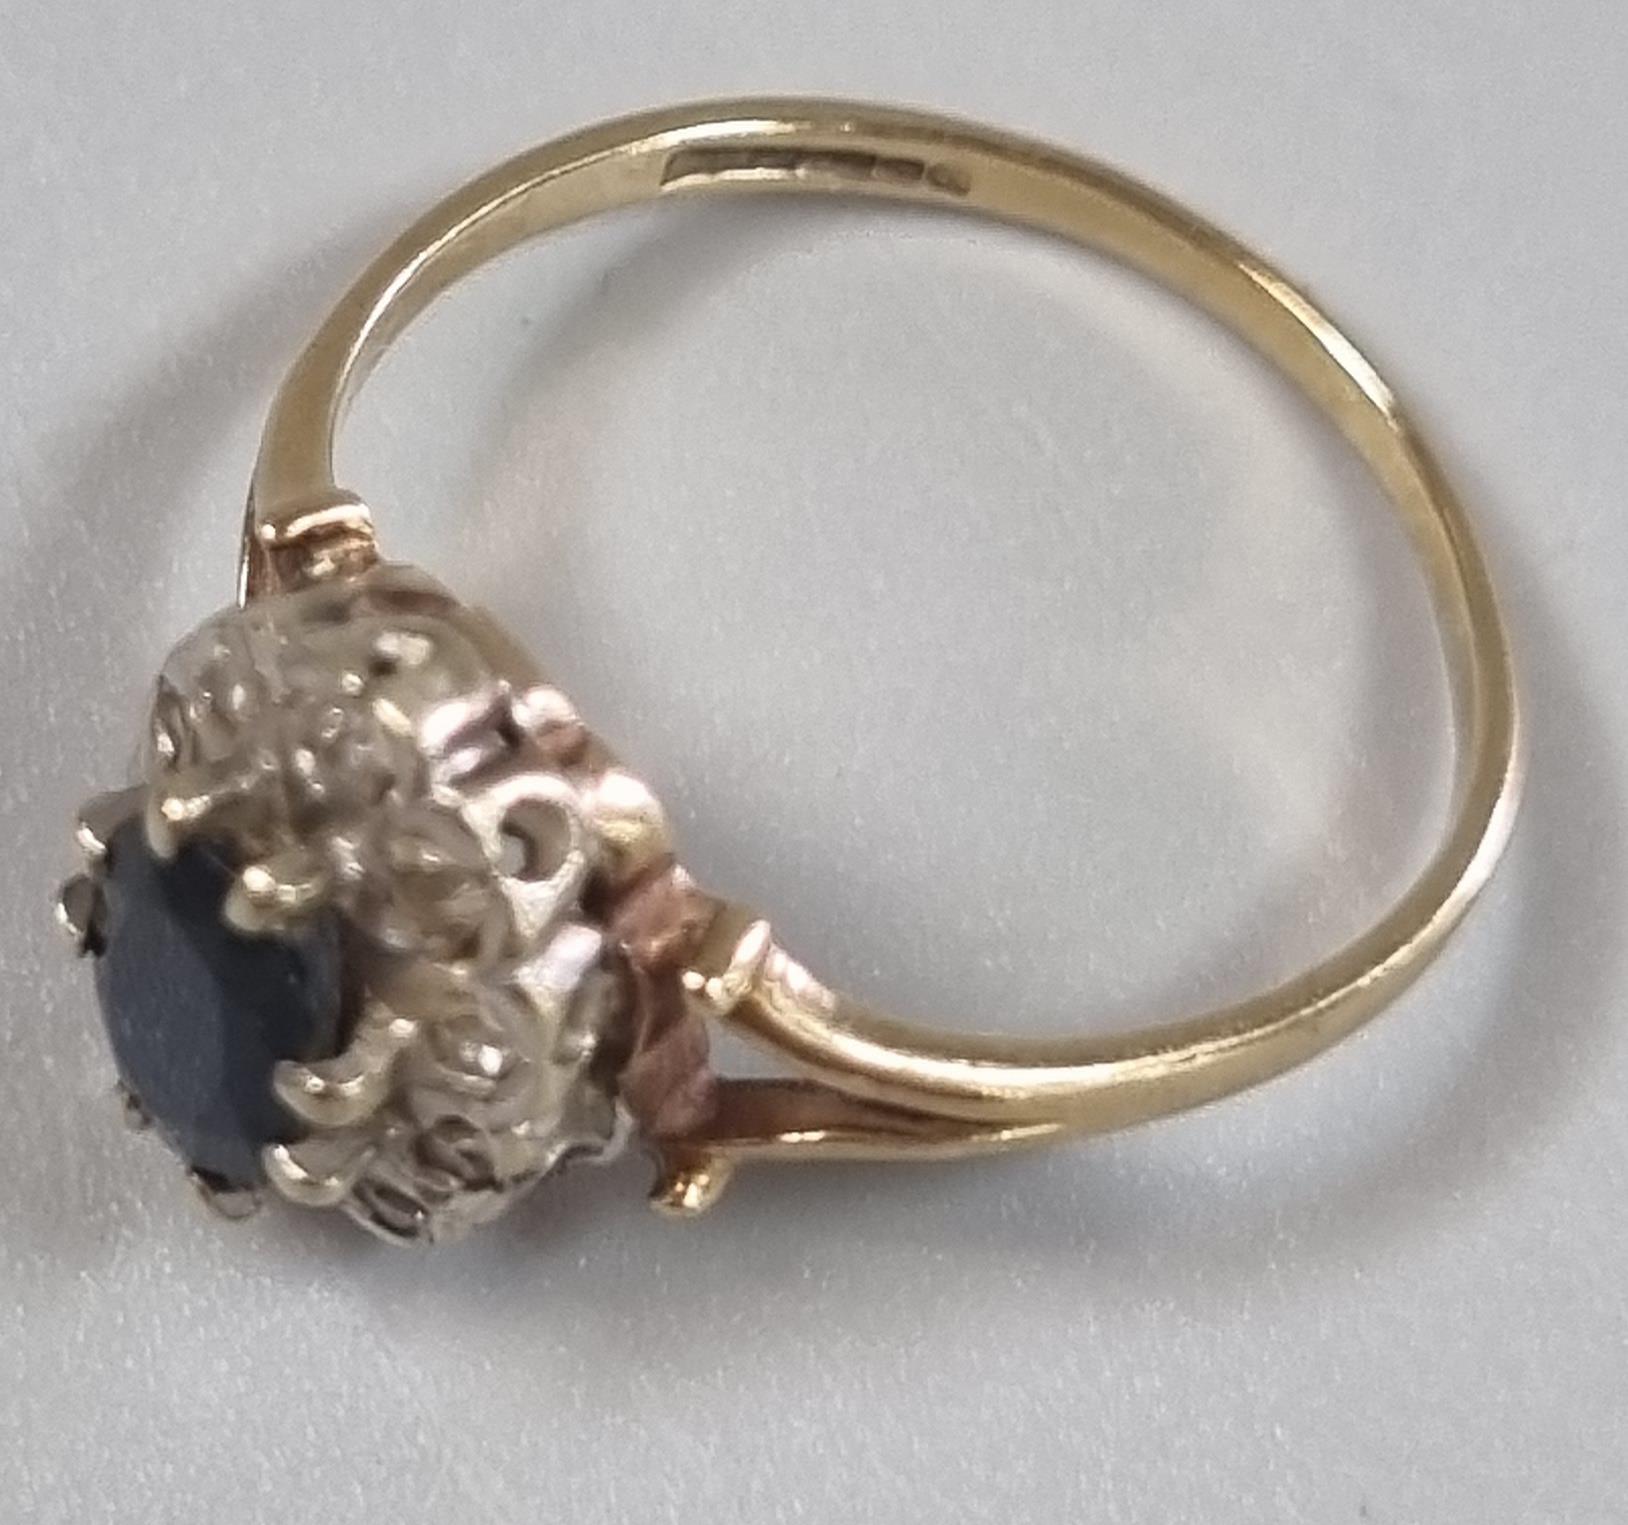 9ct gold diamond and sapphire ring. 2.2g approx. Size O1/2. (B.P. 21% + VAT) - Image 4 of 4